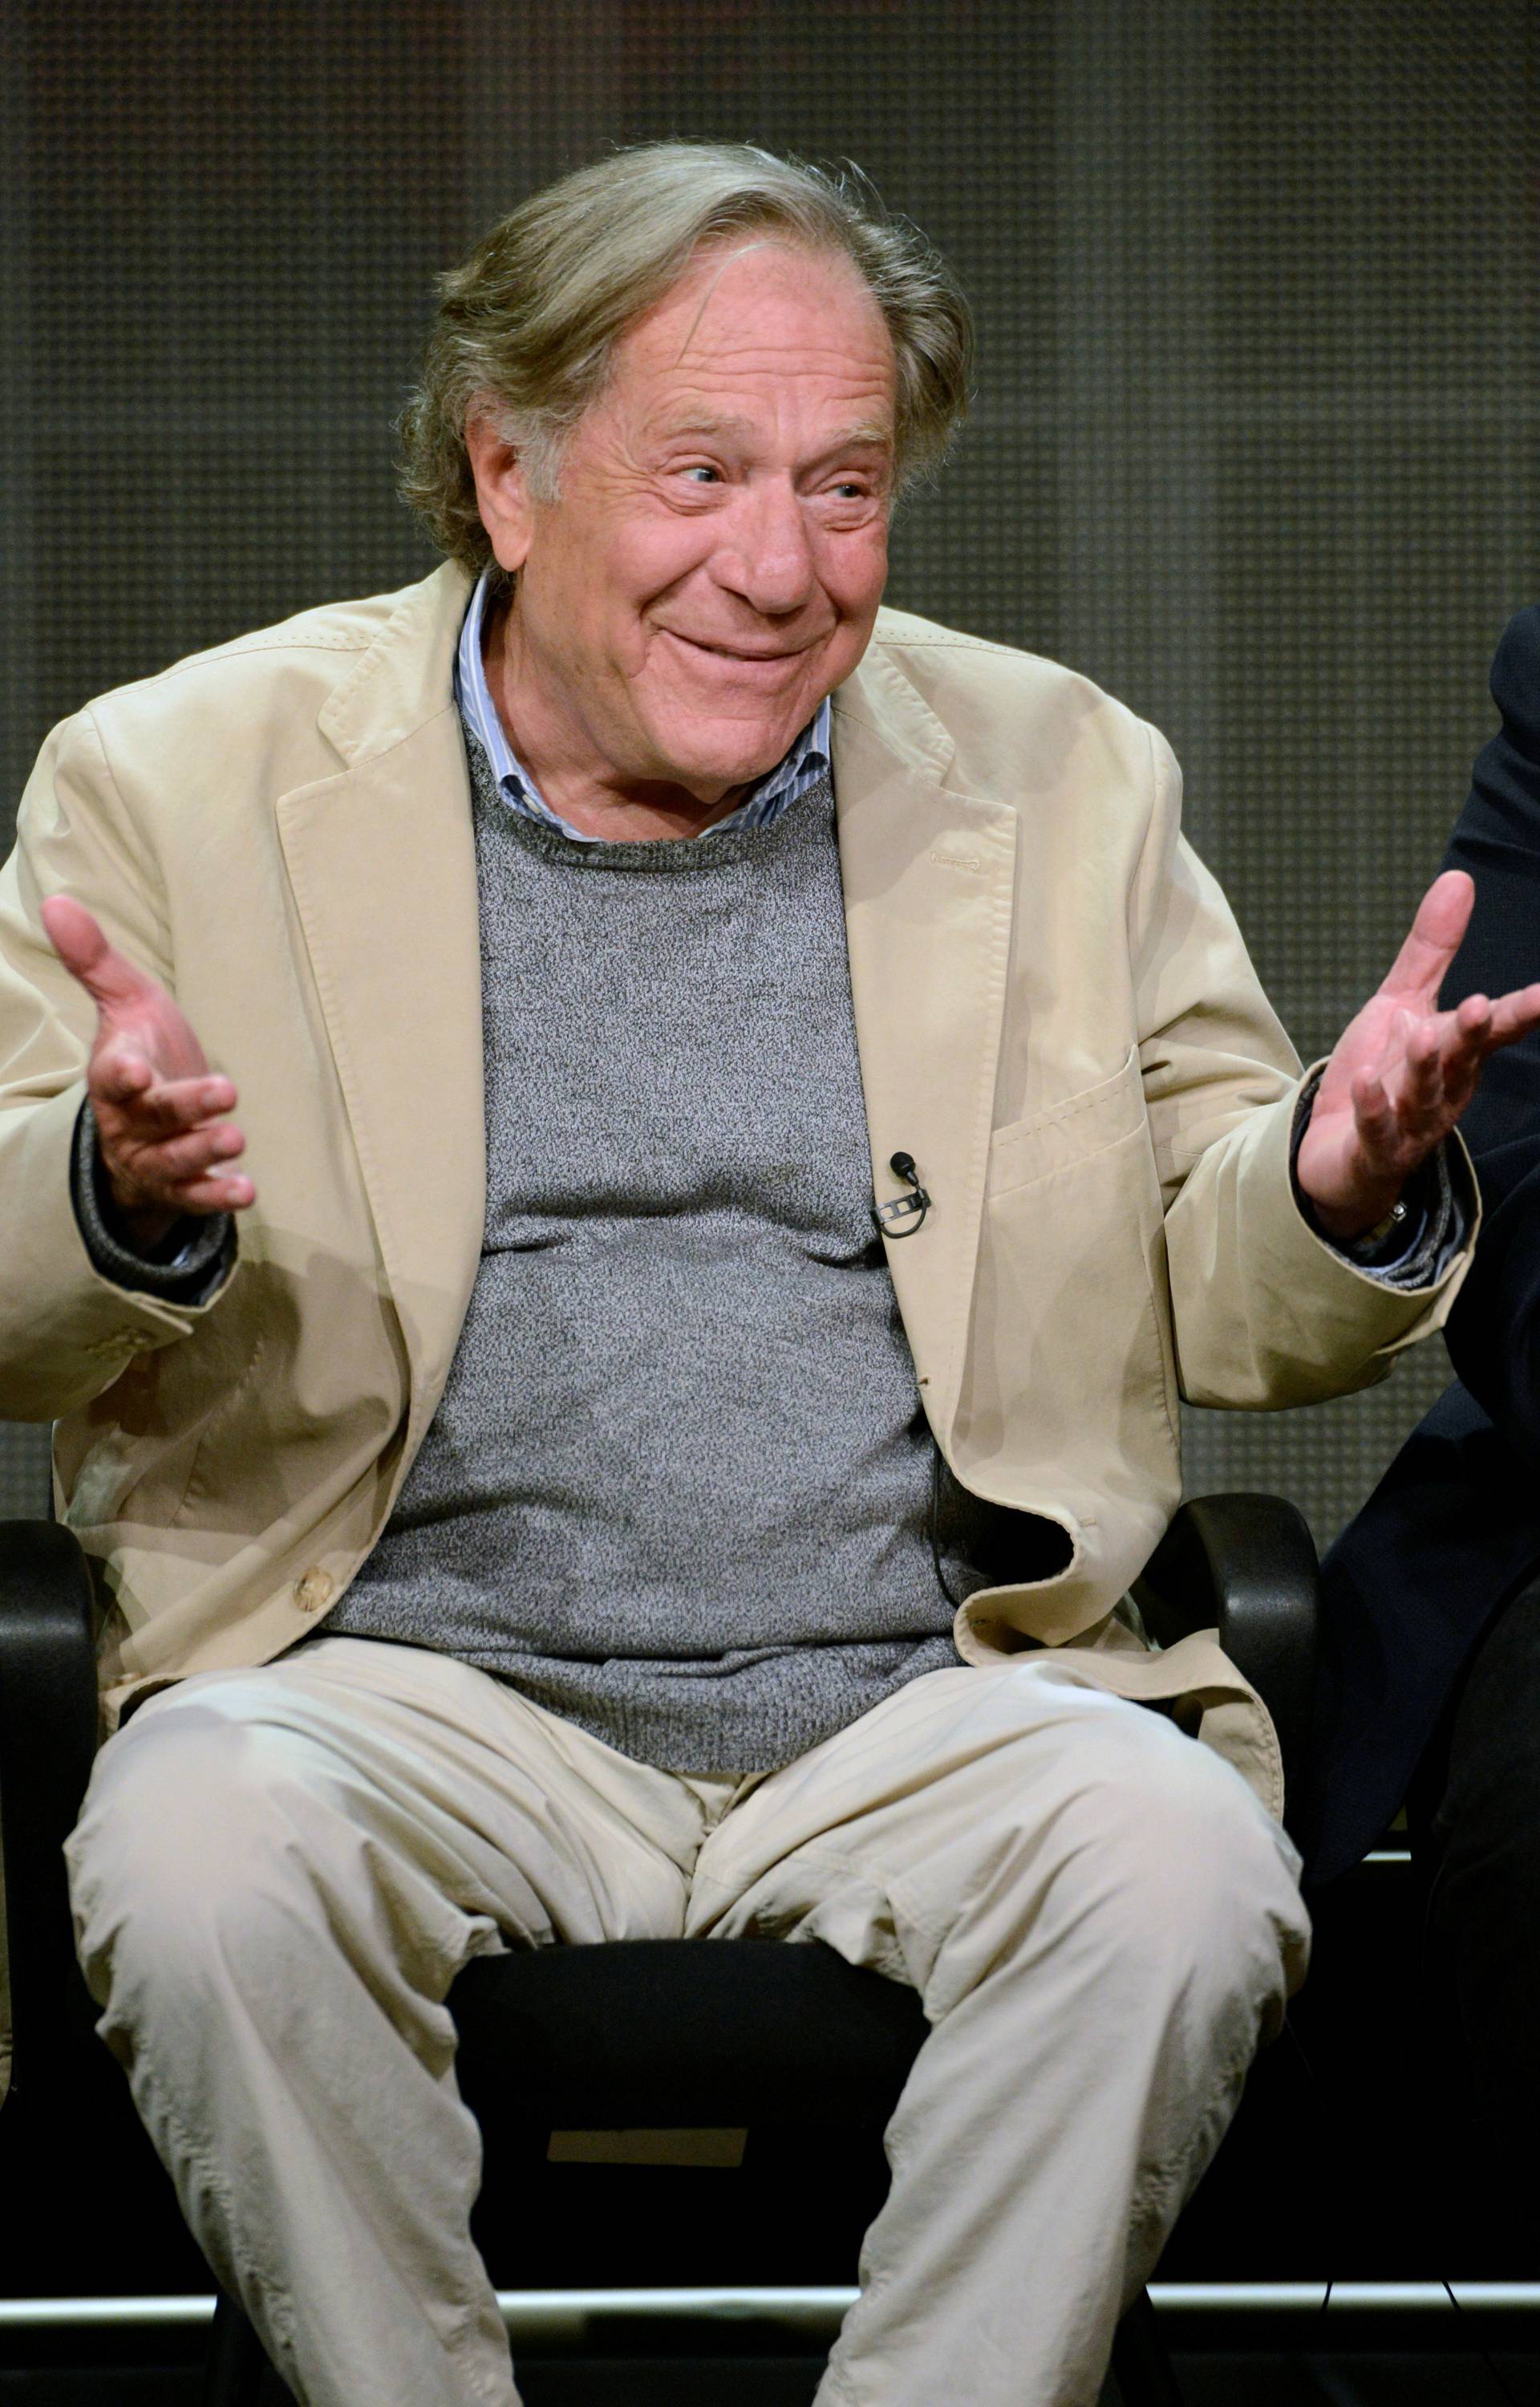 FILE PHOTO: George Segal participates in a panel for "The Goldbergs" during the Disney ABC Television Group sessions at the Television Critics Association summer press tour in Beverly Hills, California